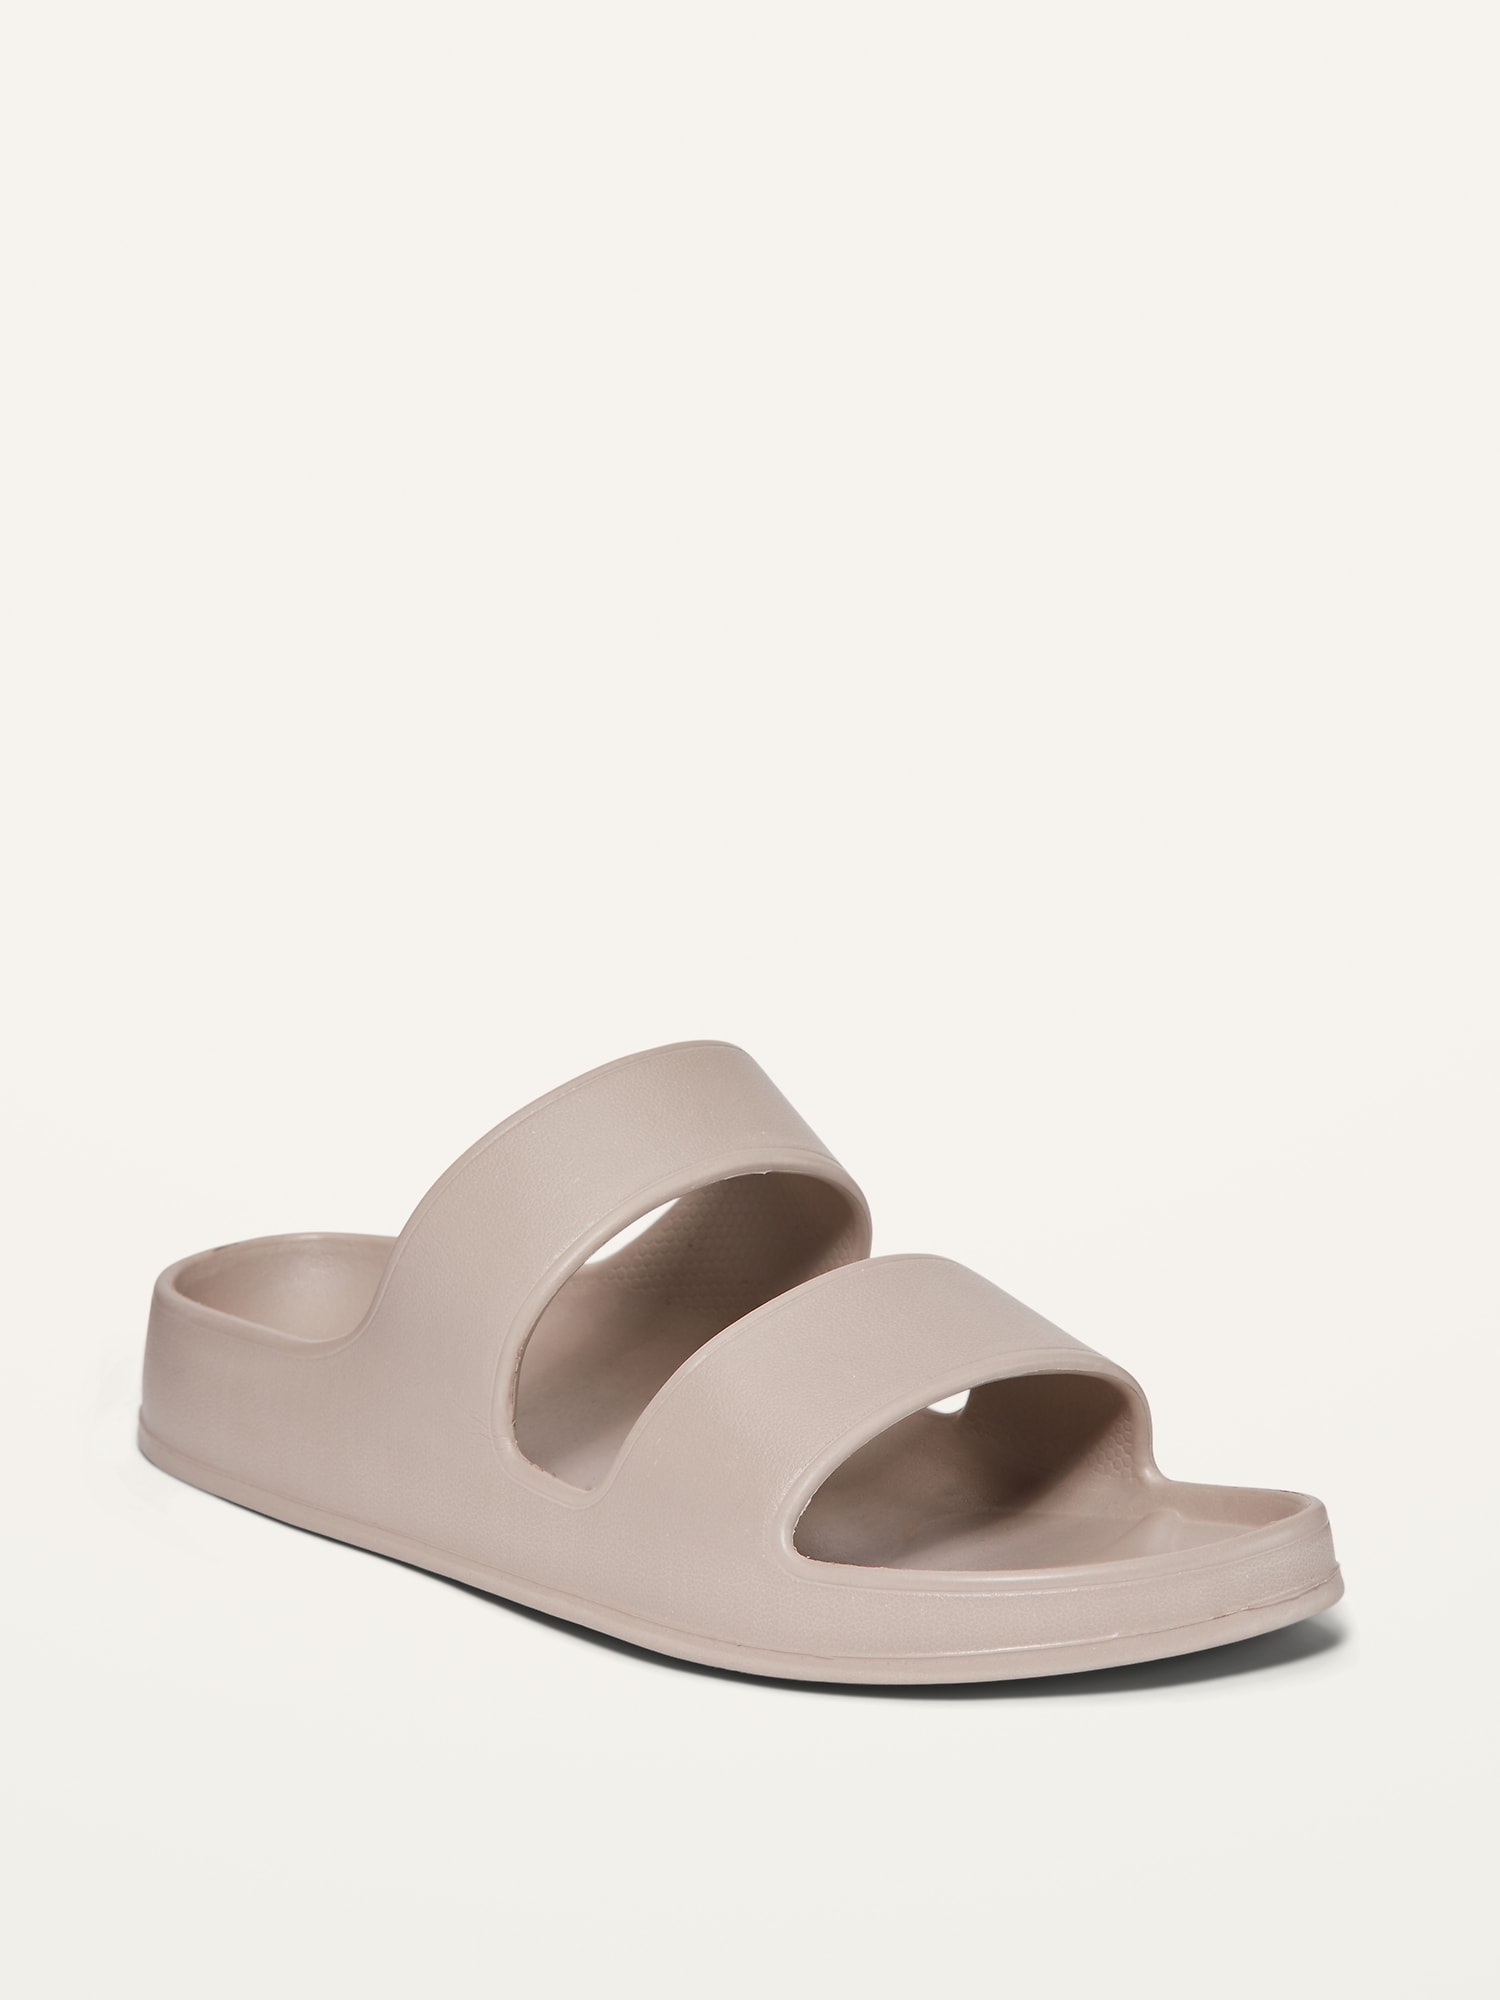 Buy > 2 strap sandals womens > in stock